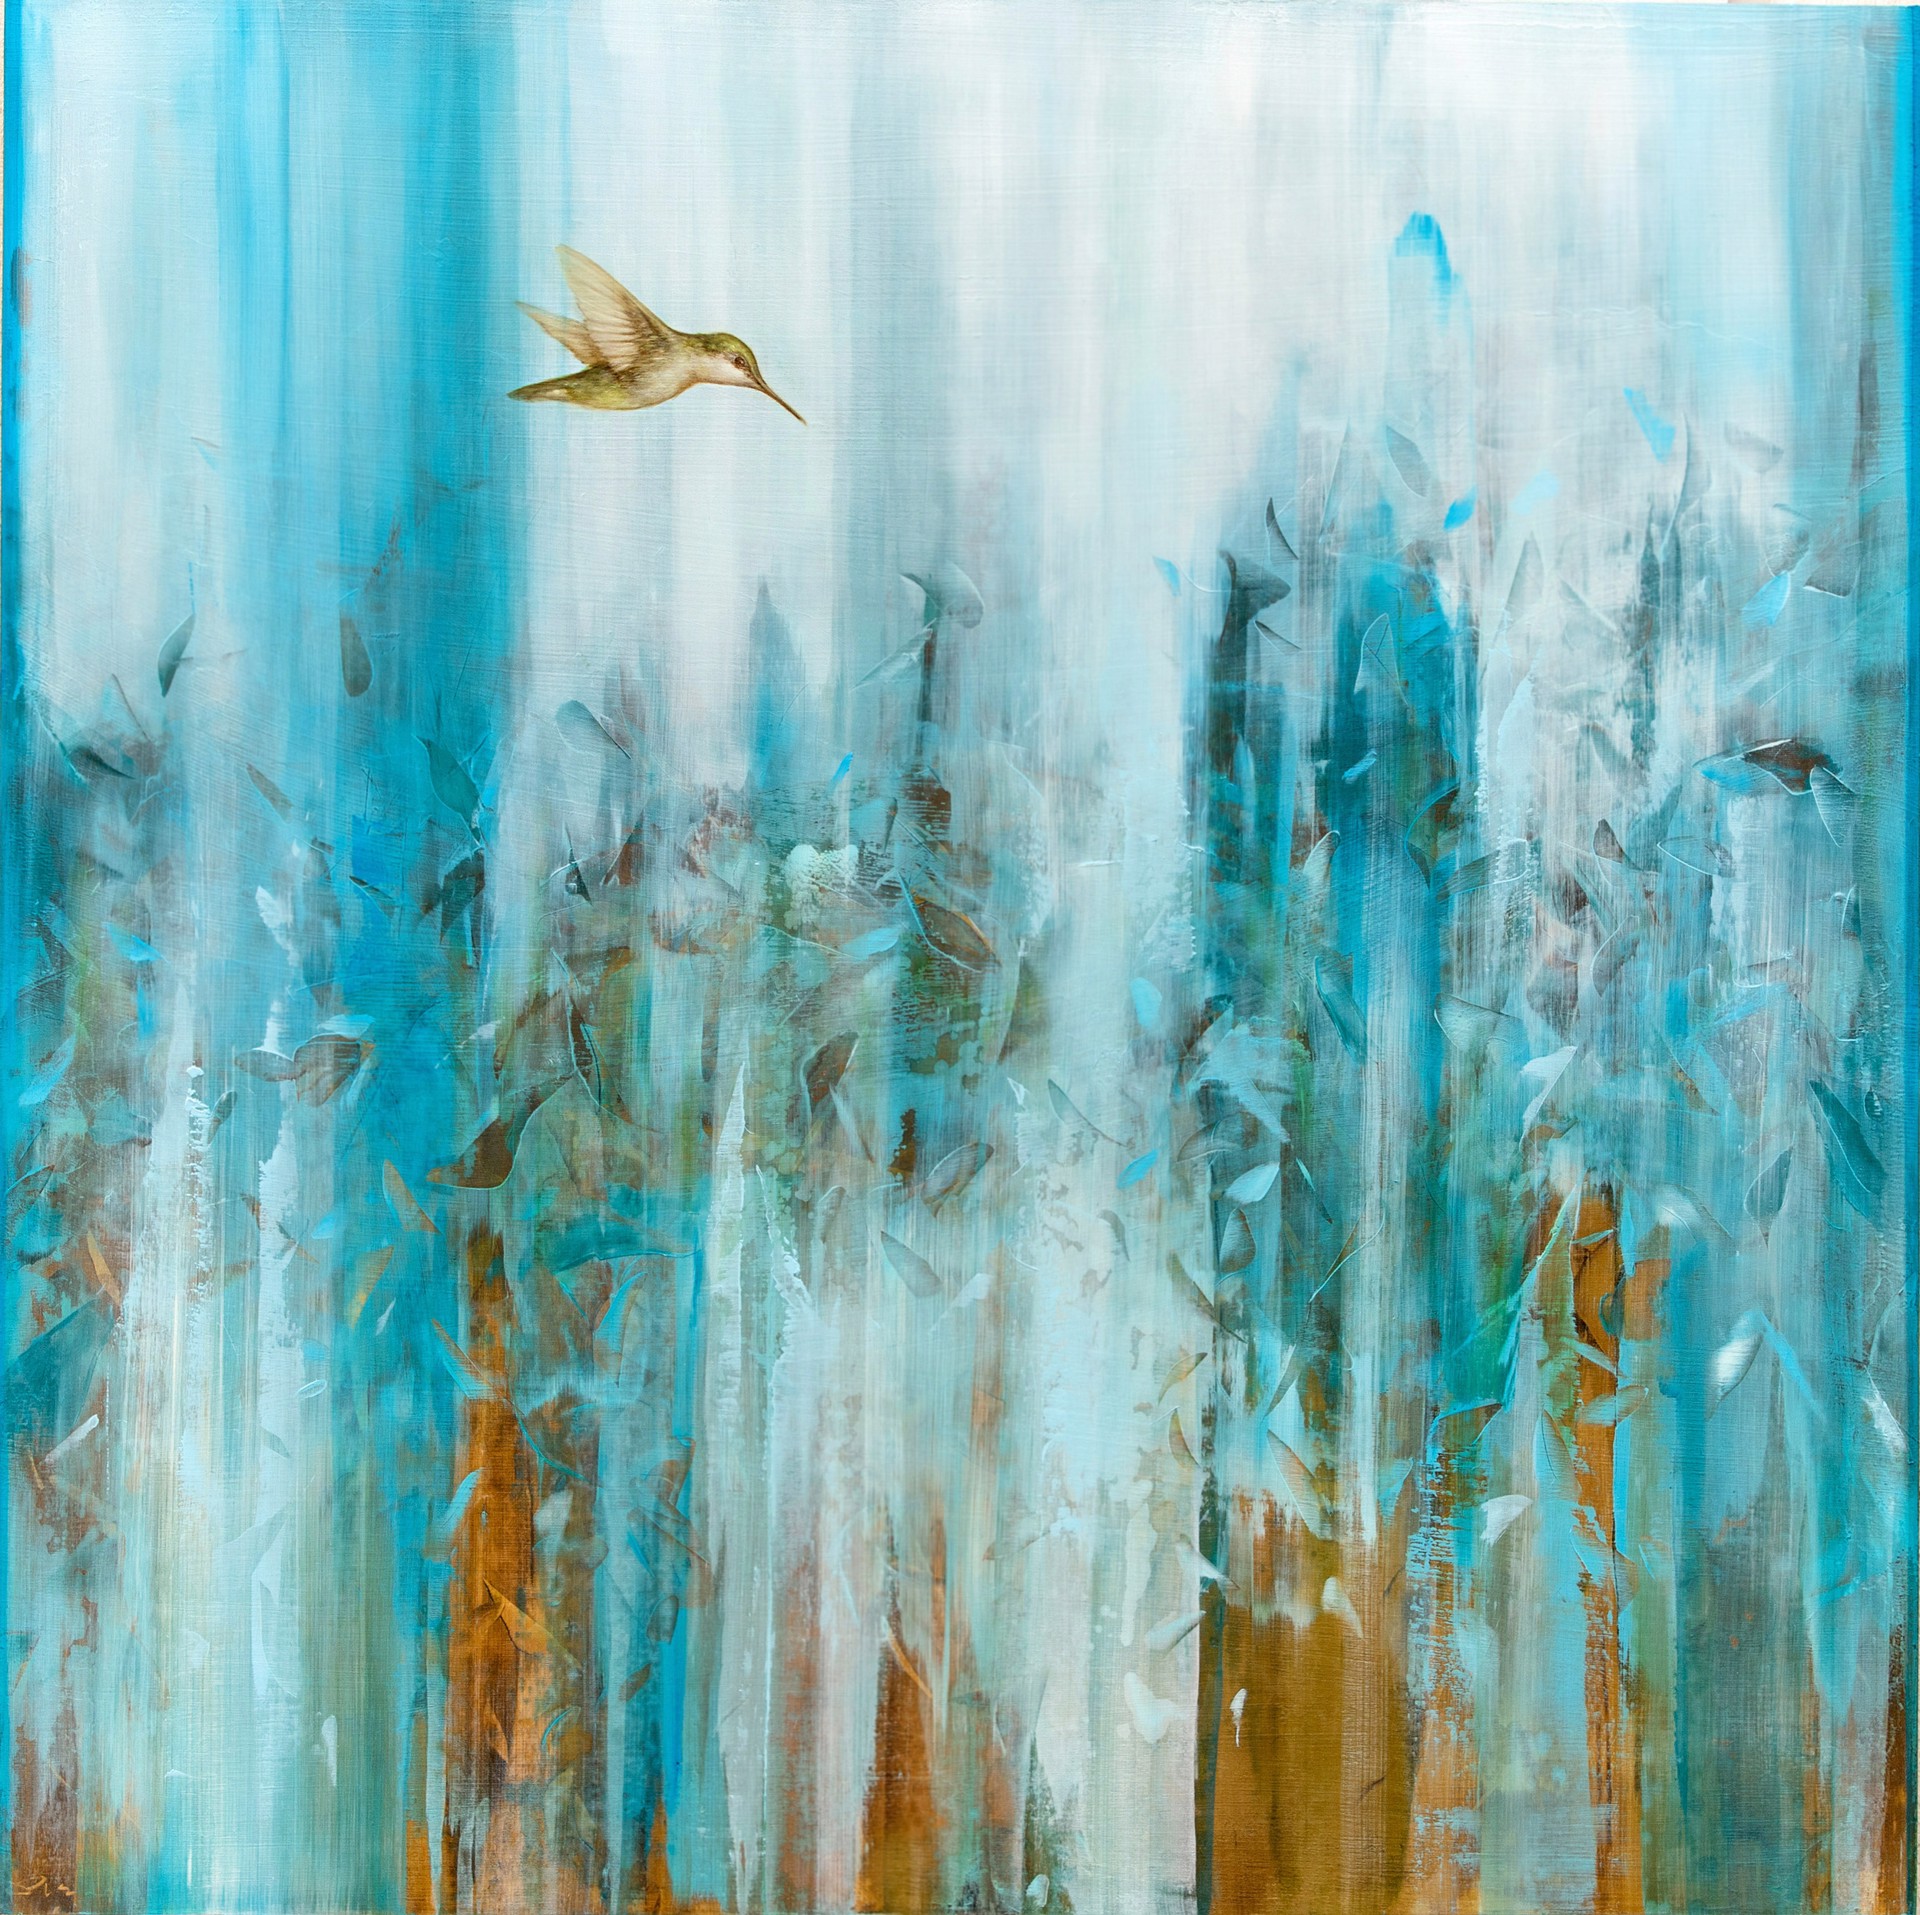 In A Garden of Teal and Gold by Jessica Pisano